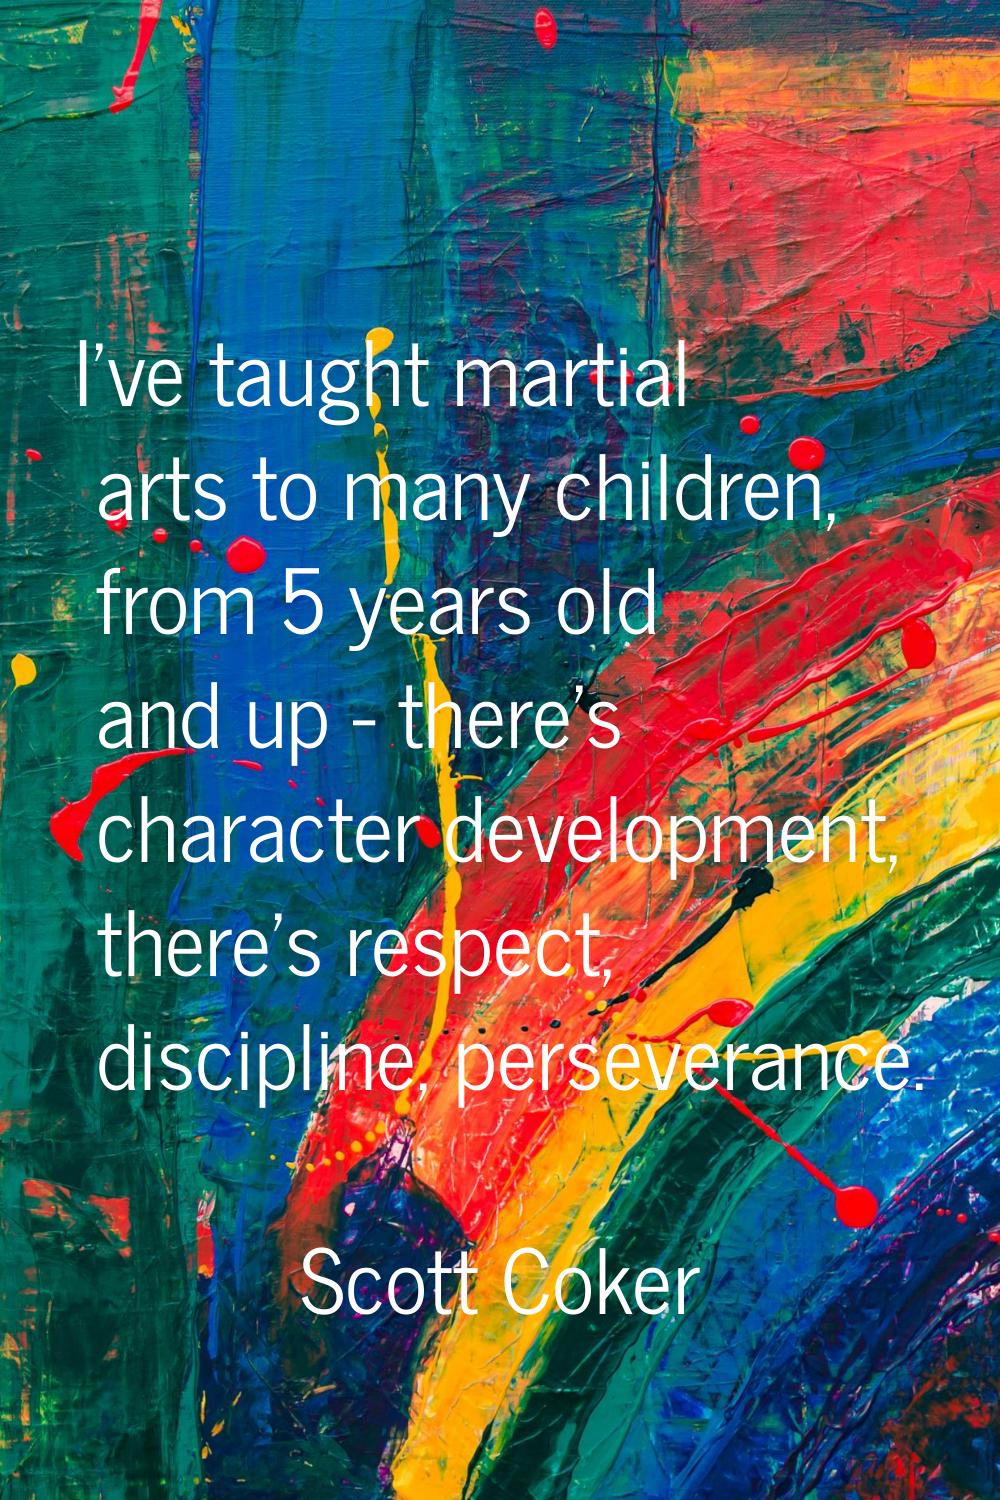 I've taught martial arts to many children, from 5 years old and up - there's character development,